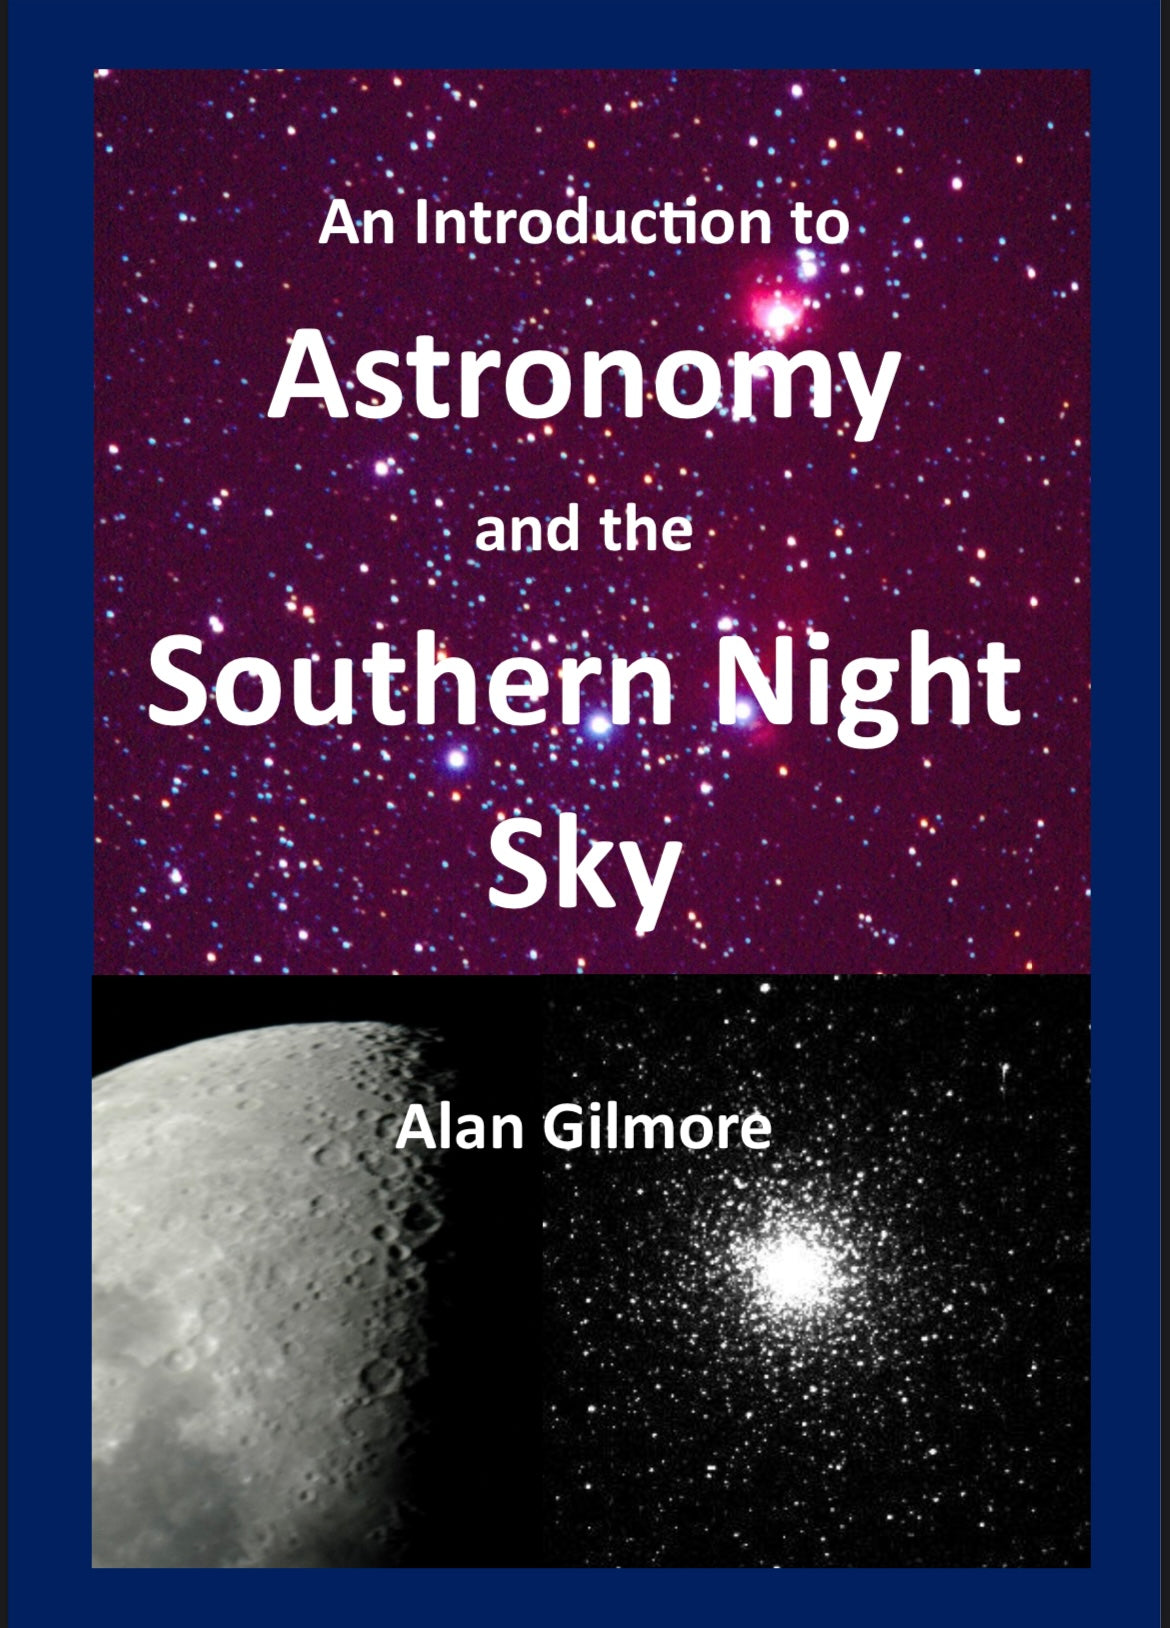 Alan Gilmore: An Introduction to Astronomy and the Southern Night Sky